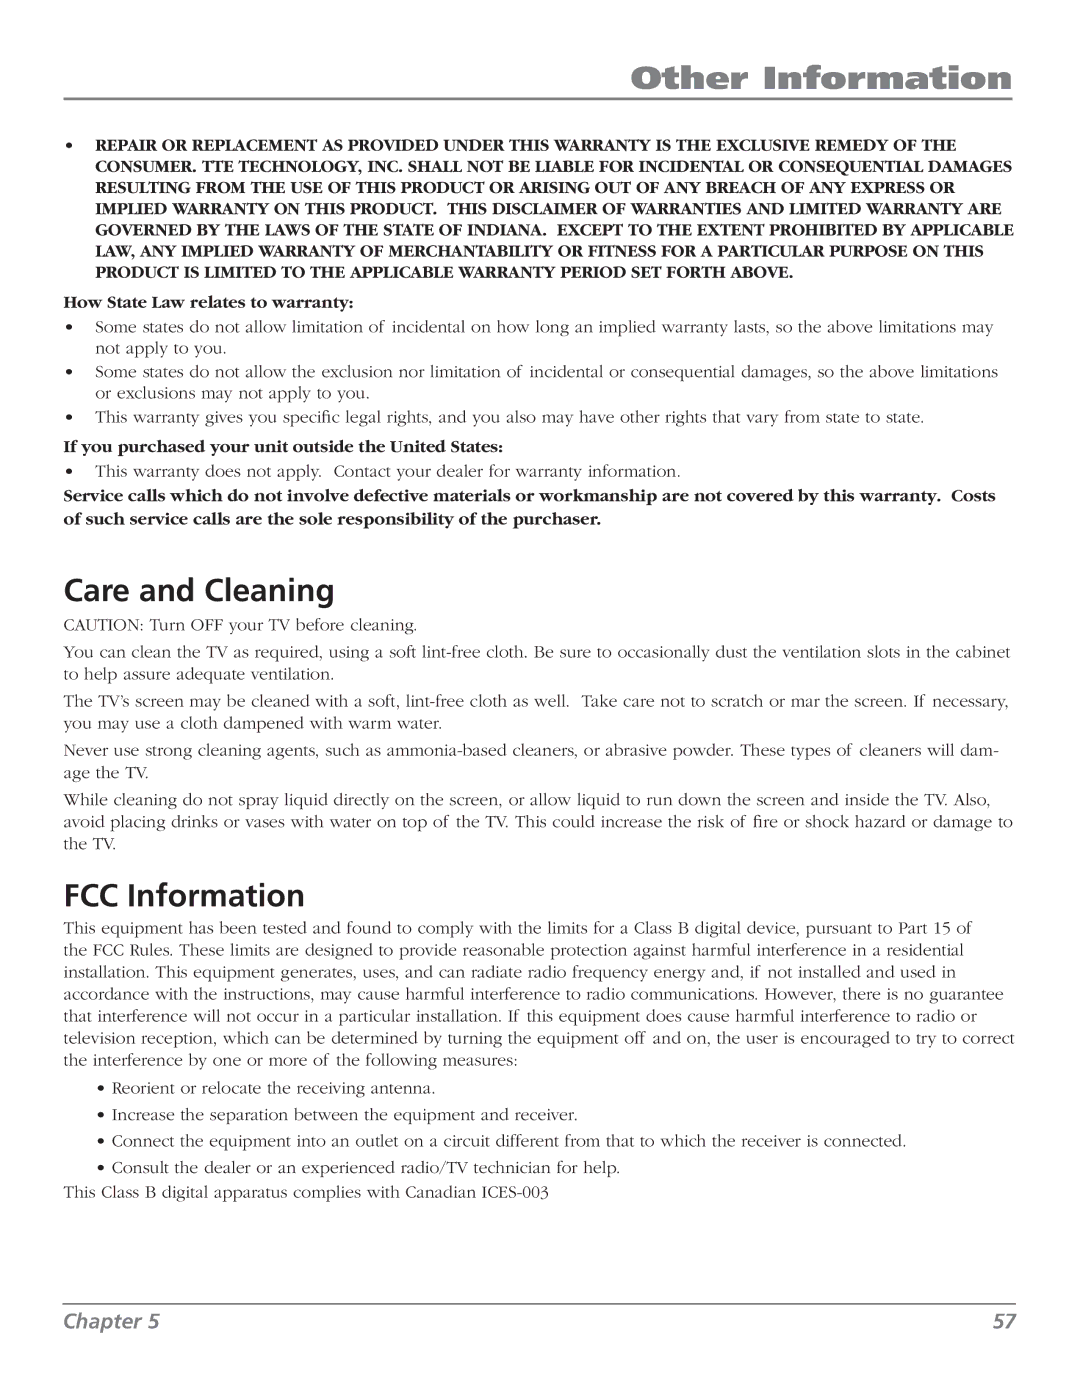 RCA M50WH187 manual Care and Cleaning, FCC Information 